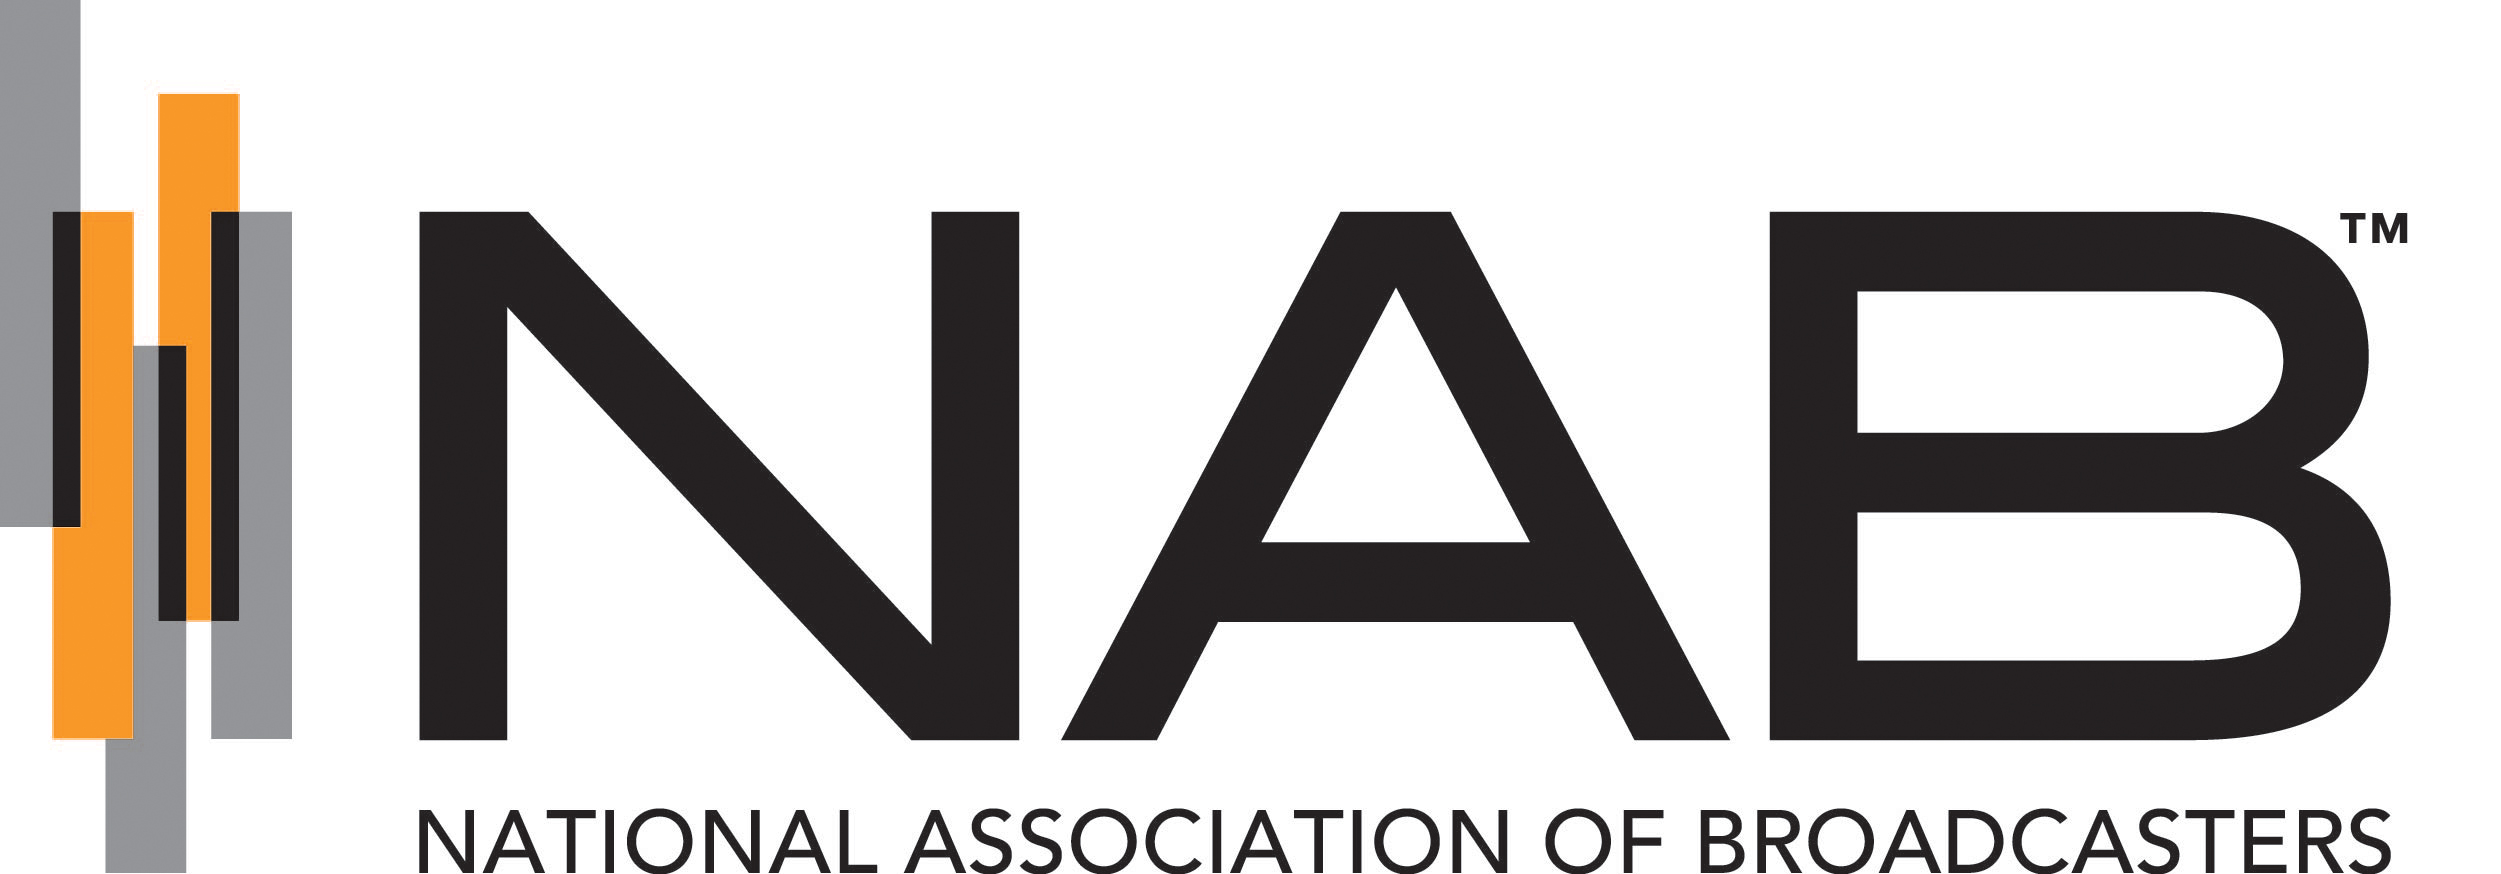 The word nab in black text over the words national association of broadcasters in black text.